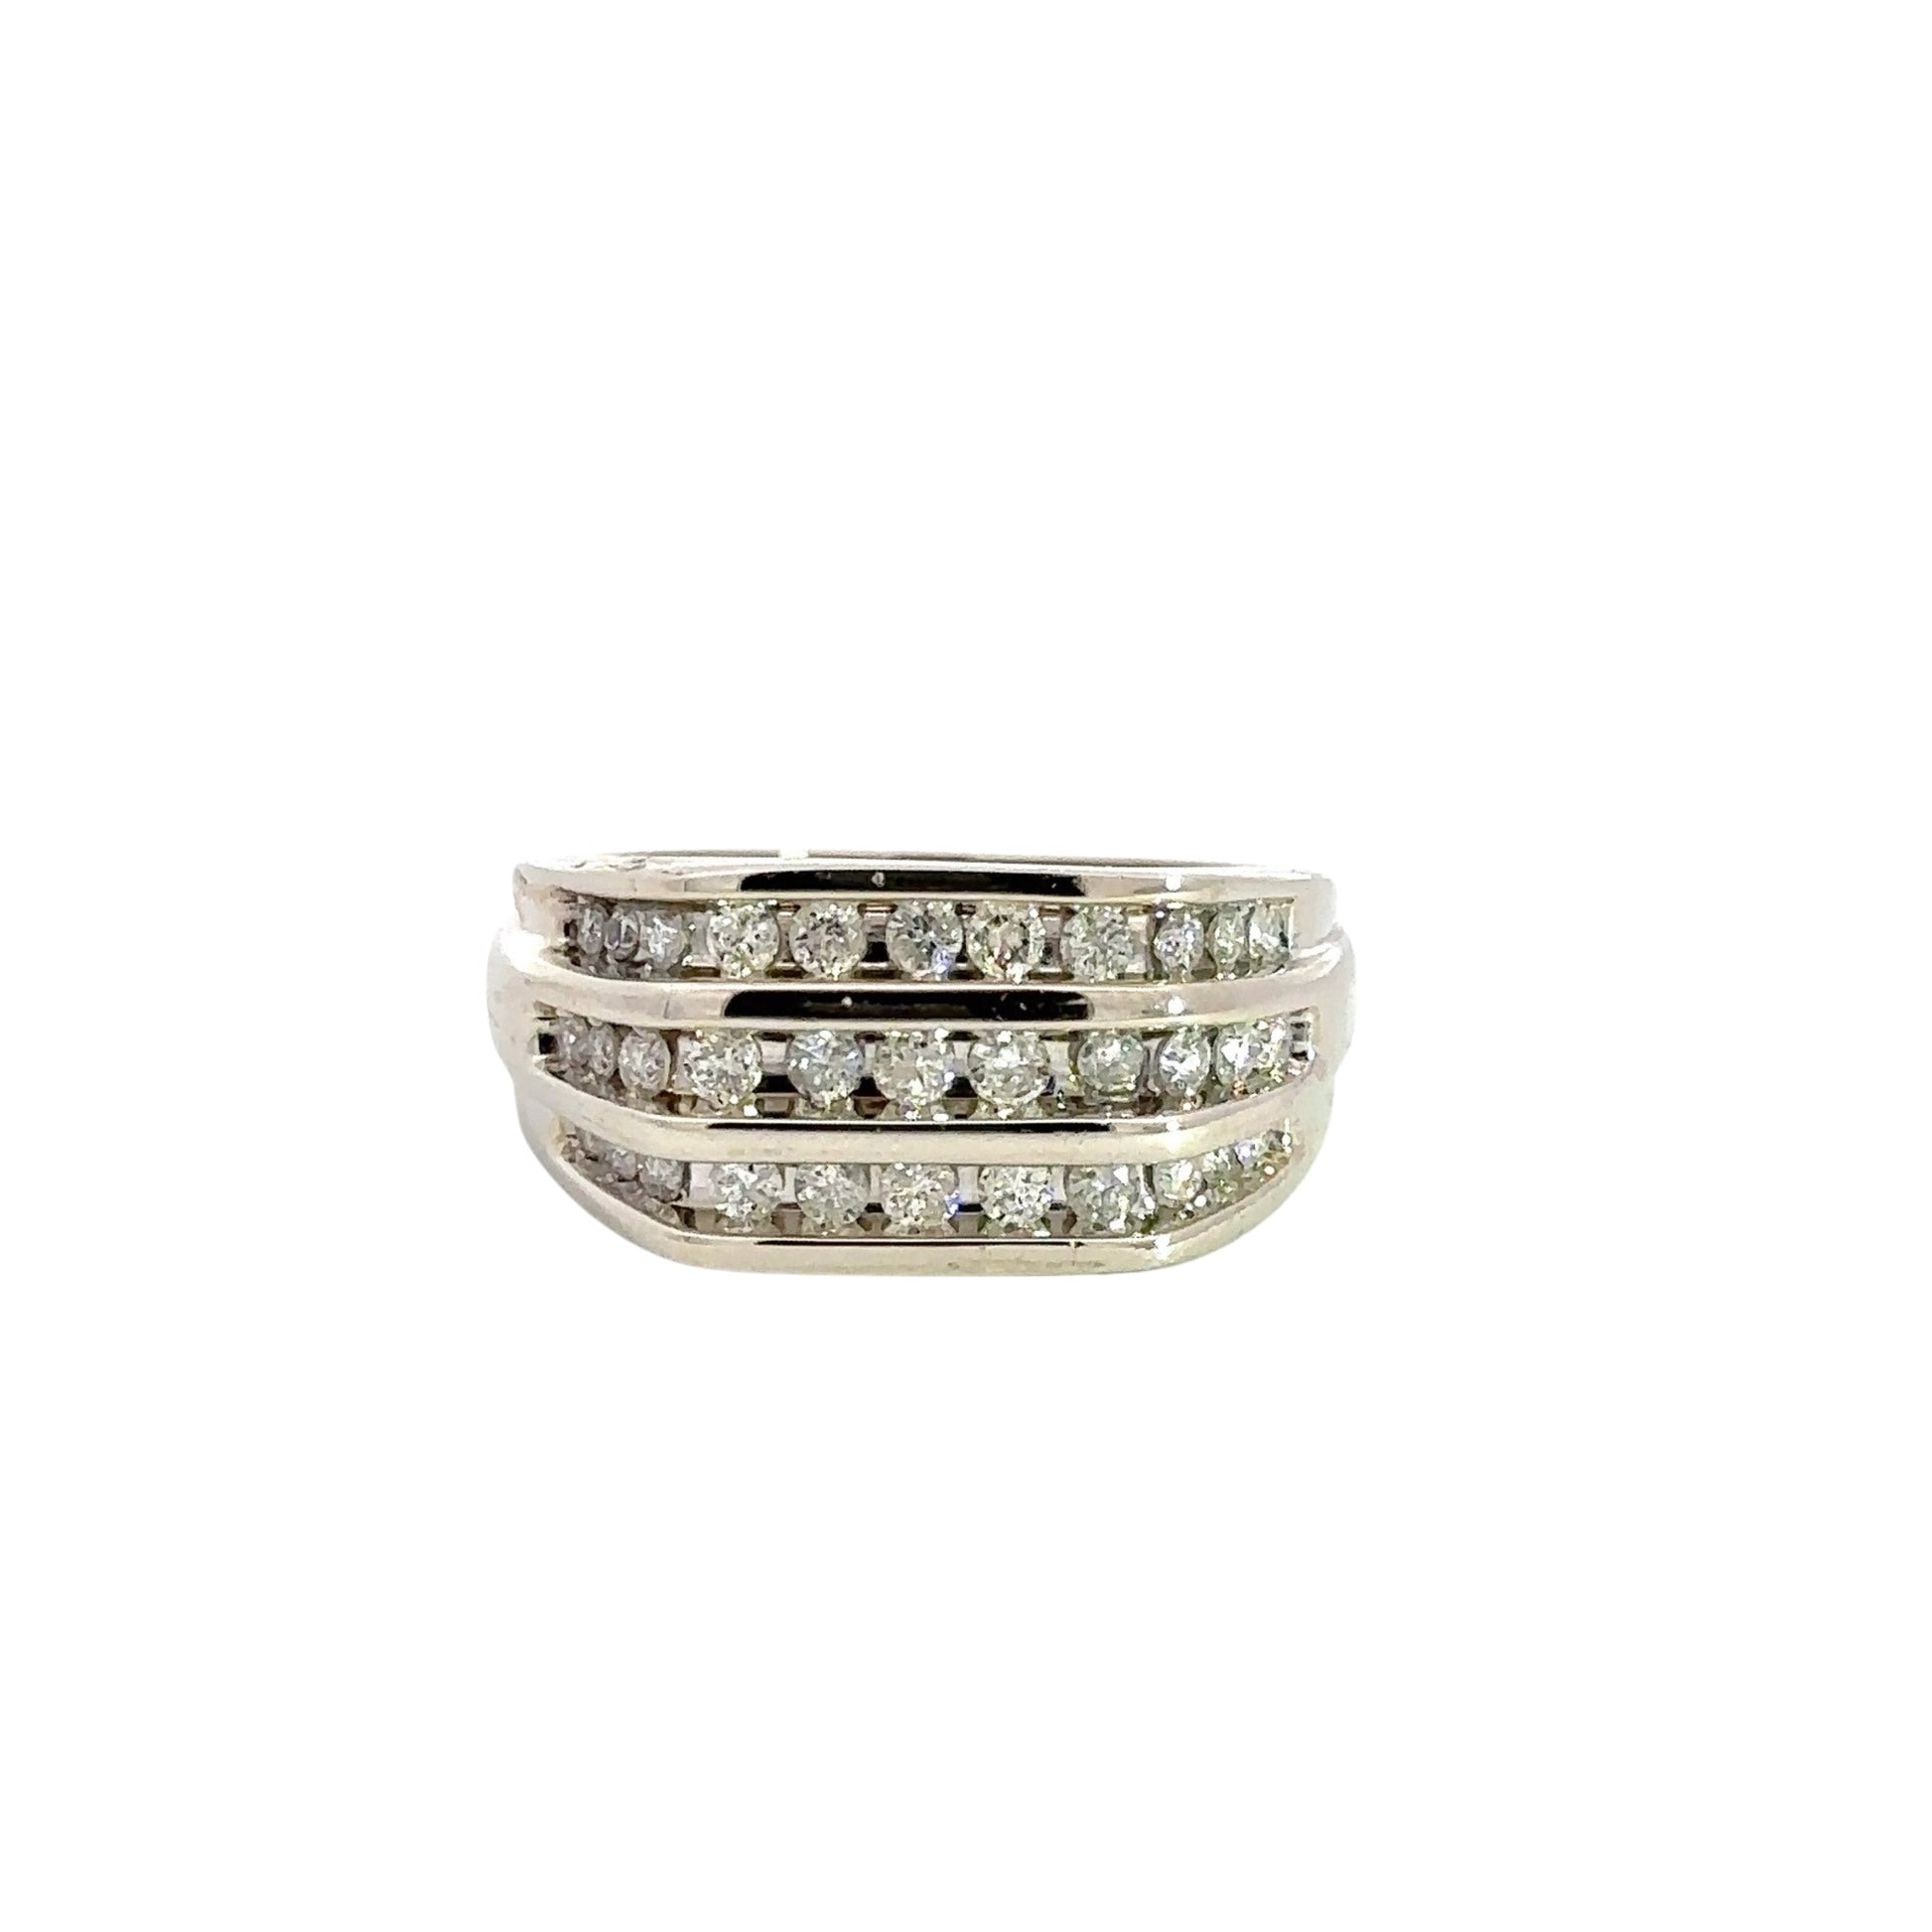 Front of white gold diamond band ring with 3 rows of small diamonds